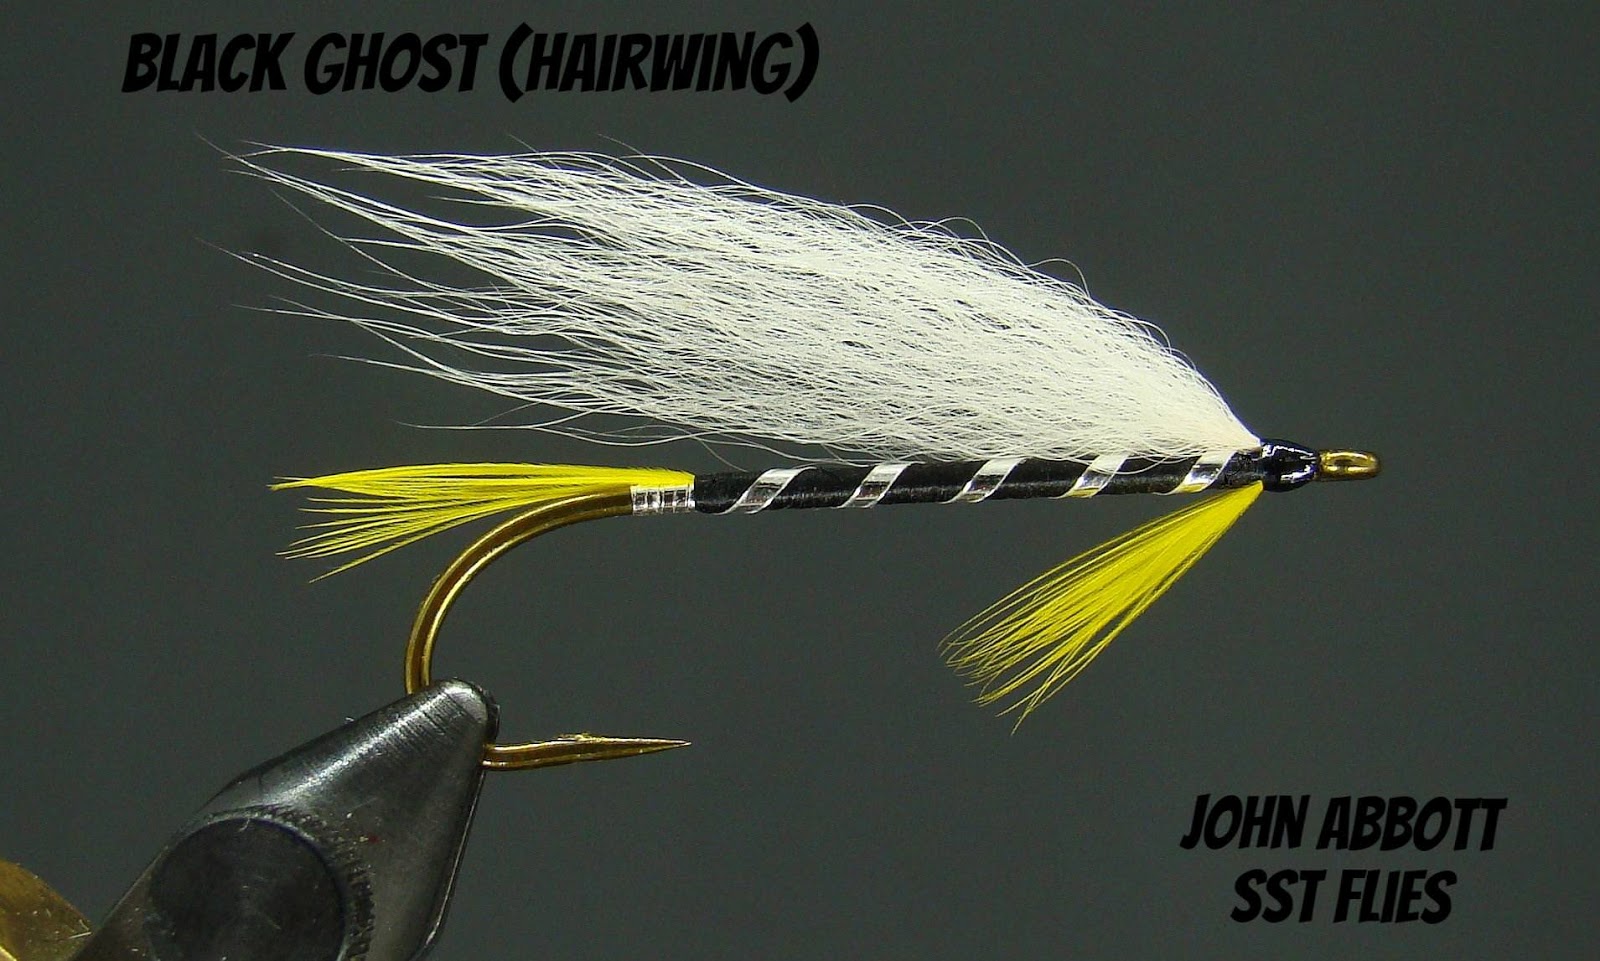 Marabou Skunk Black and White with short streamers (1 1/2 inches)